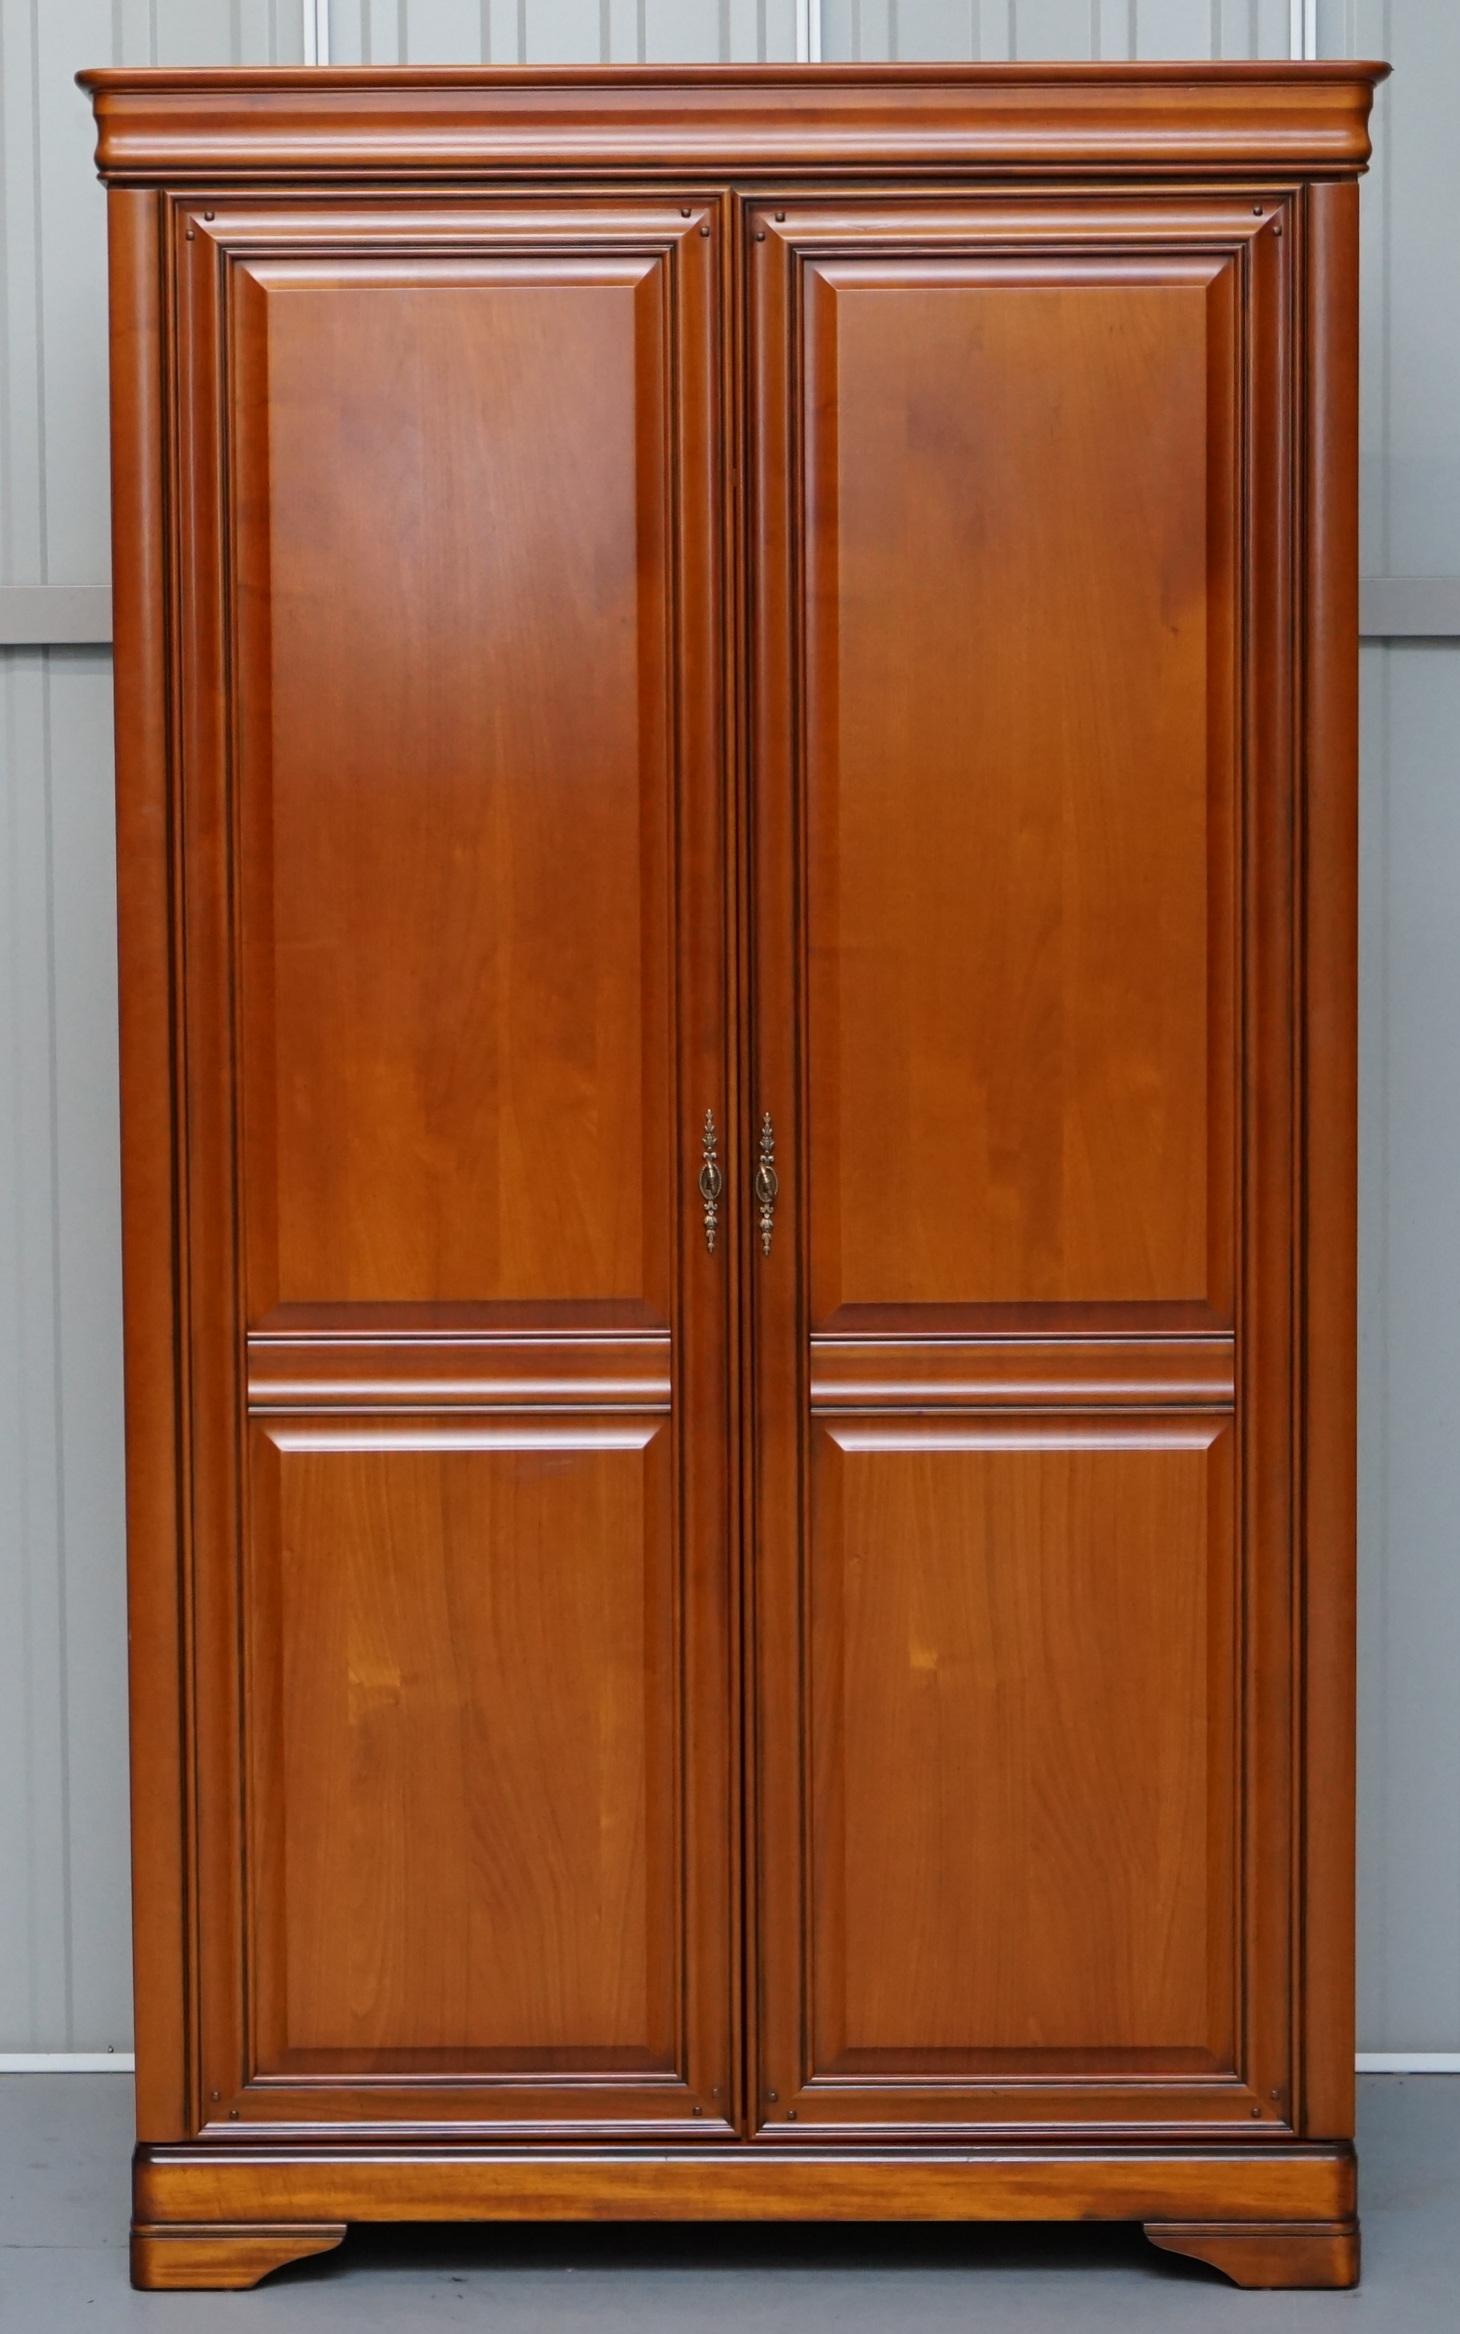 We are delighted to offer for sale this stunning solid cherrywood double bank wardrobe

This are part of a suite, I also have the matching pair of tall bedside tables and small standard single bedside table

This is a very thick and solid